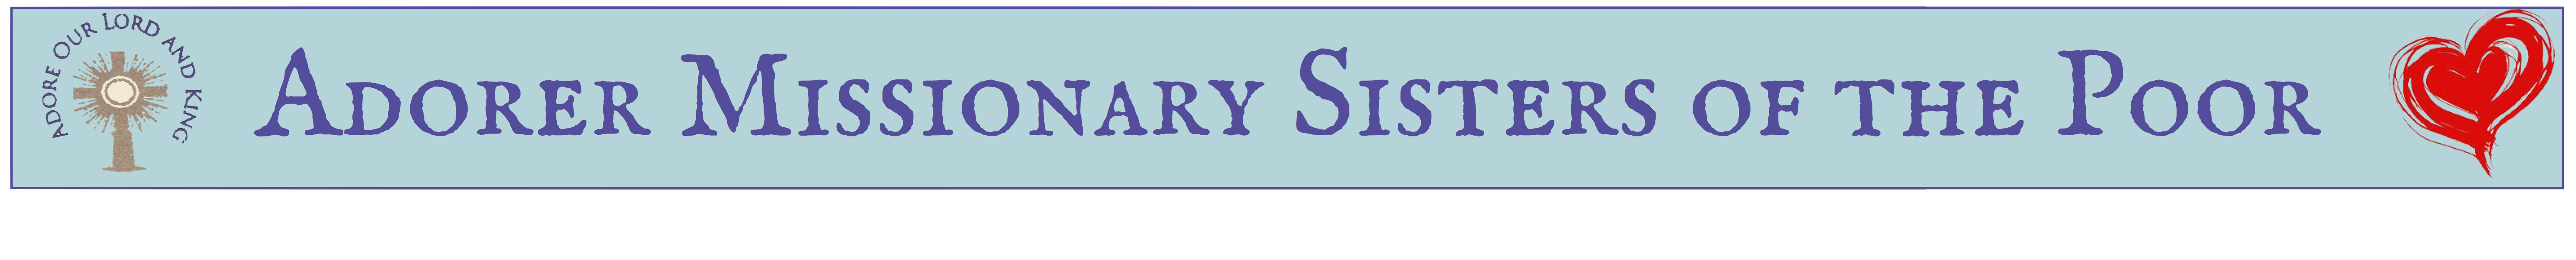 Adorer Missionary Sisters of the Poor